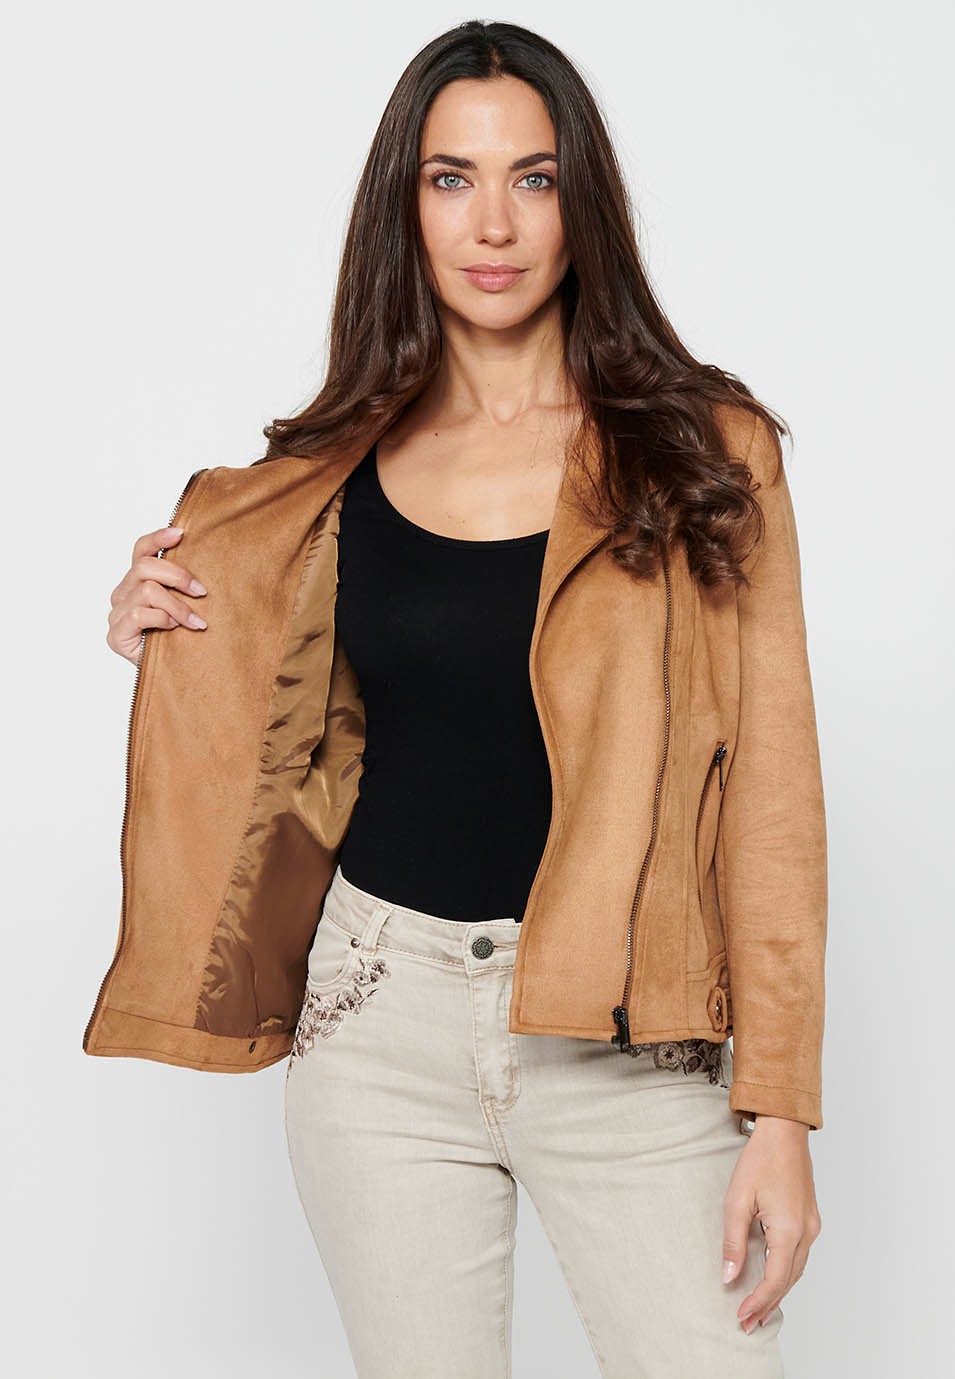 Camel Color Long Sleeve Jacket with Cross-Zip Closure with Lapel Collar and Pockets for Women 7